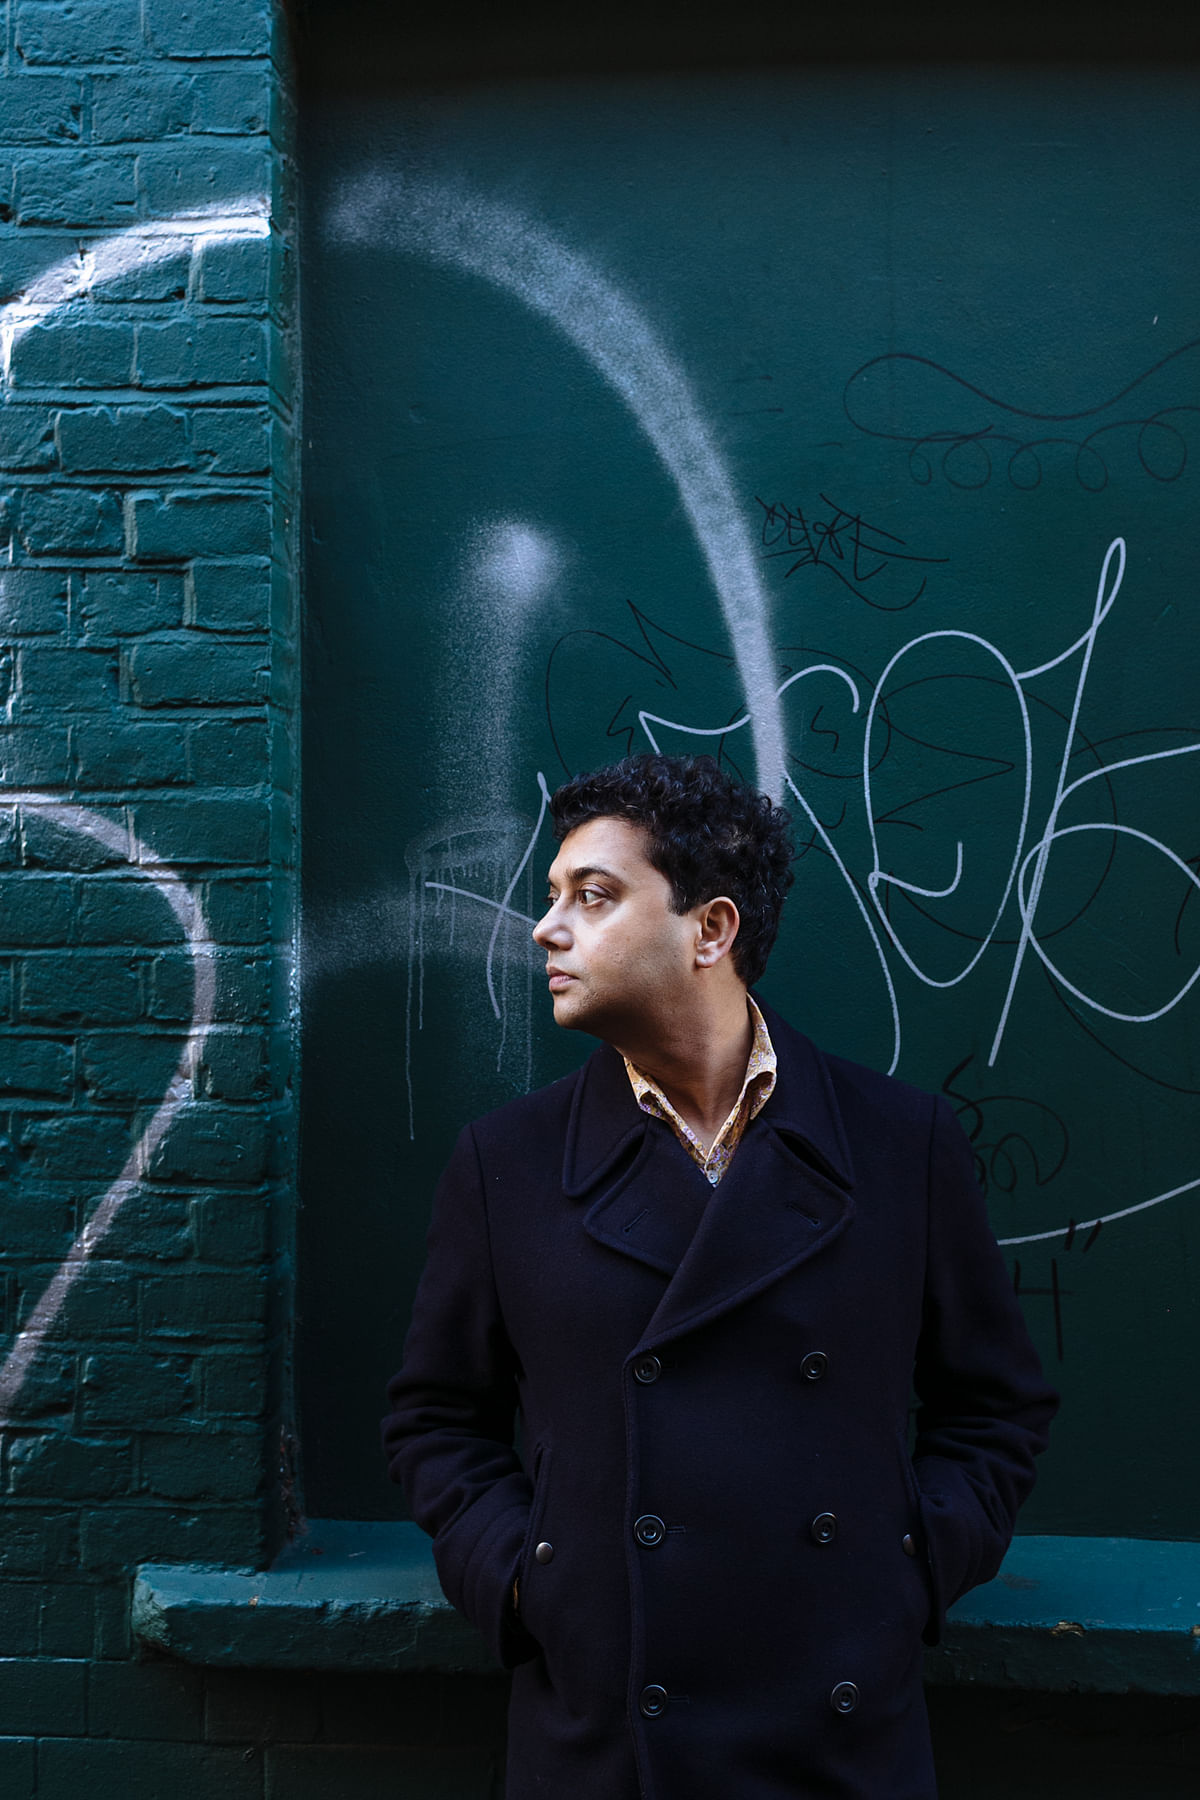 Man Booker-nominated author Neel Mukherjee’s latest book holds a mirror to many uncomfortable truths.